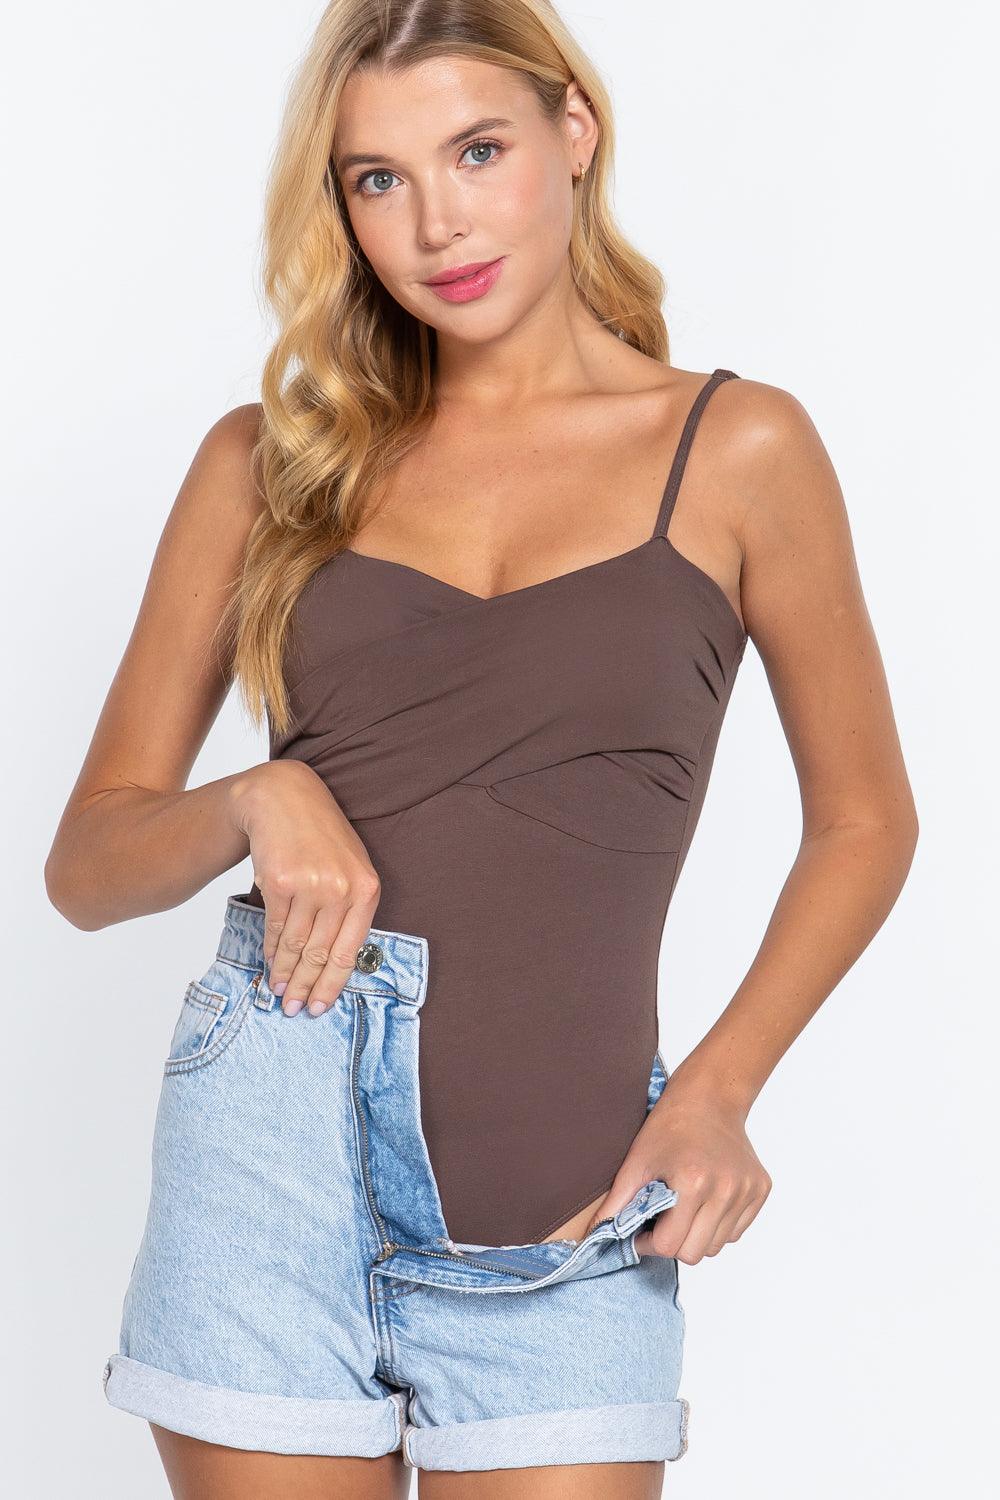 Buying Guide: Stylish and Healthy Dresses 2023 | Fashionably Fit | Twisted Cami Bodysuit W/bra Cup